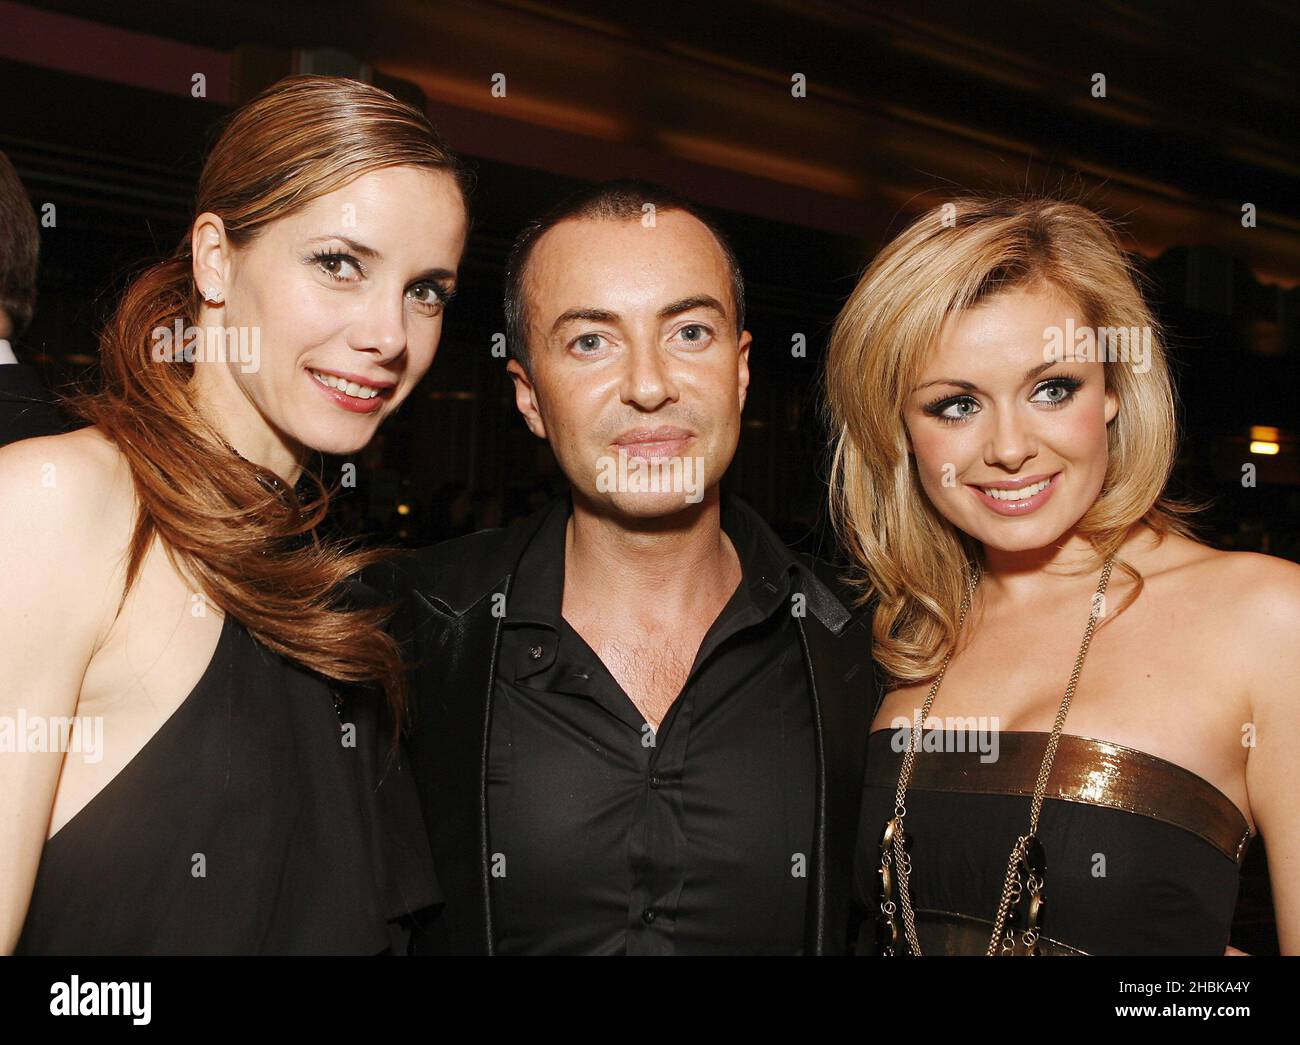 Darcy Bussell ,Julien MacDonald, and Katherine Jenkins at the Reception at the Viva La Diva, Carling Apollo, Hammersmith, London. Stock Photo